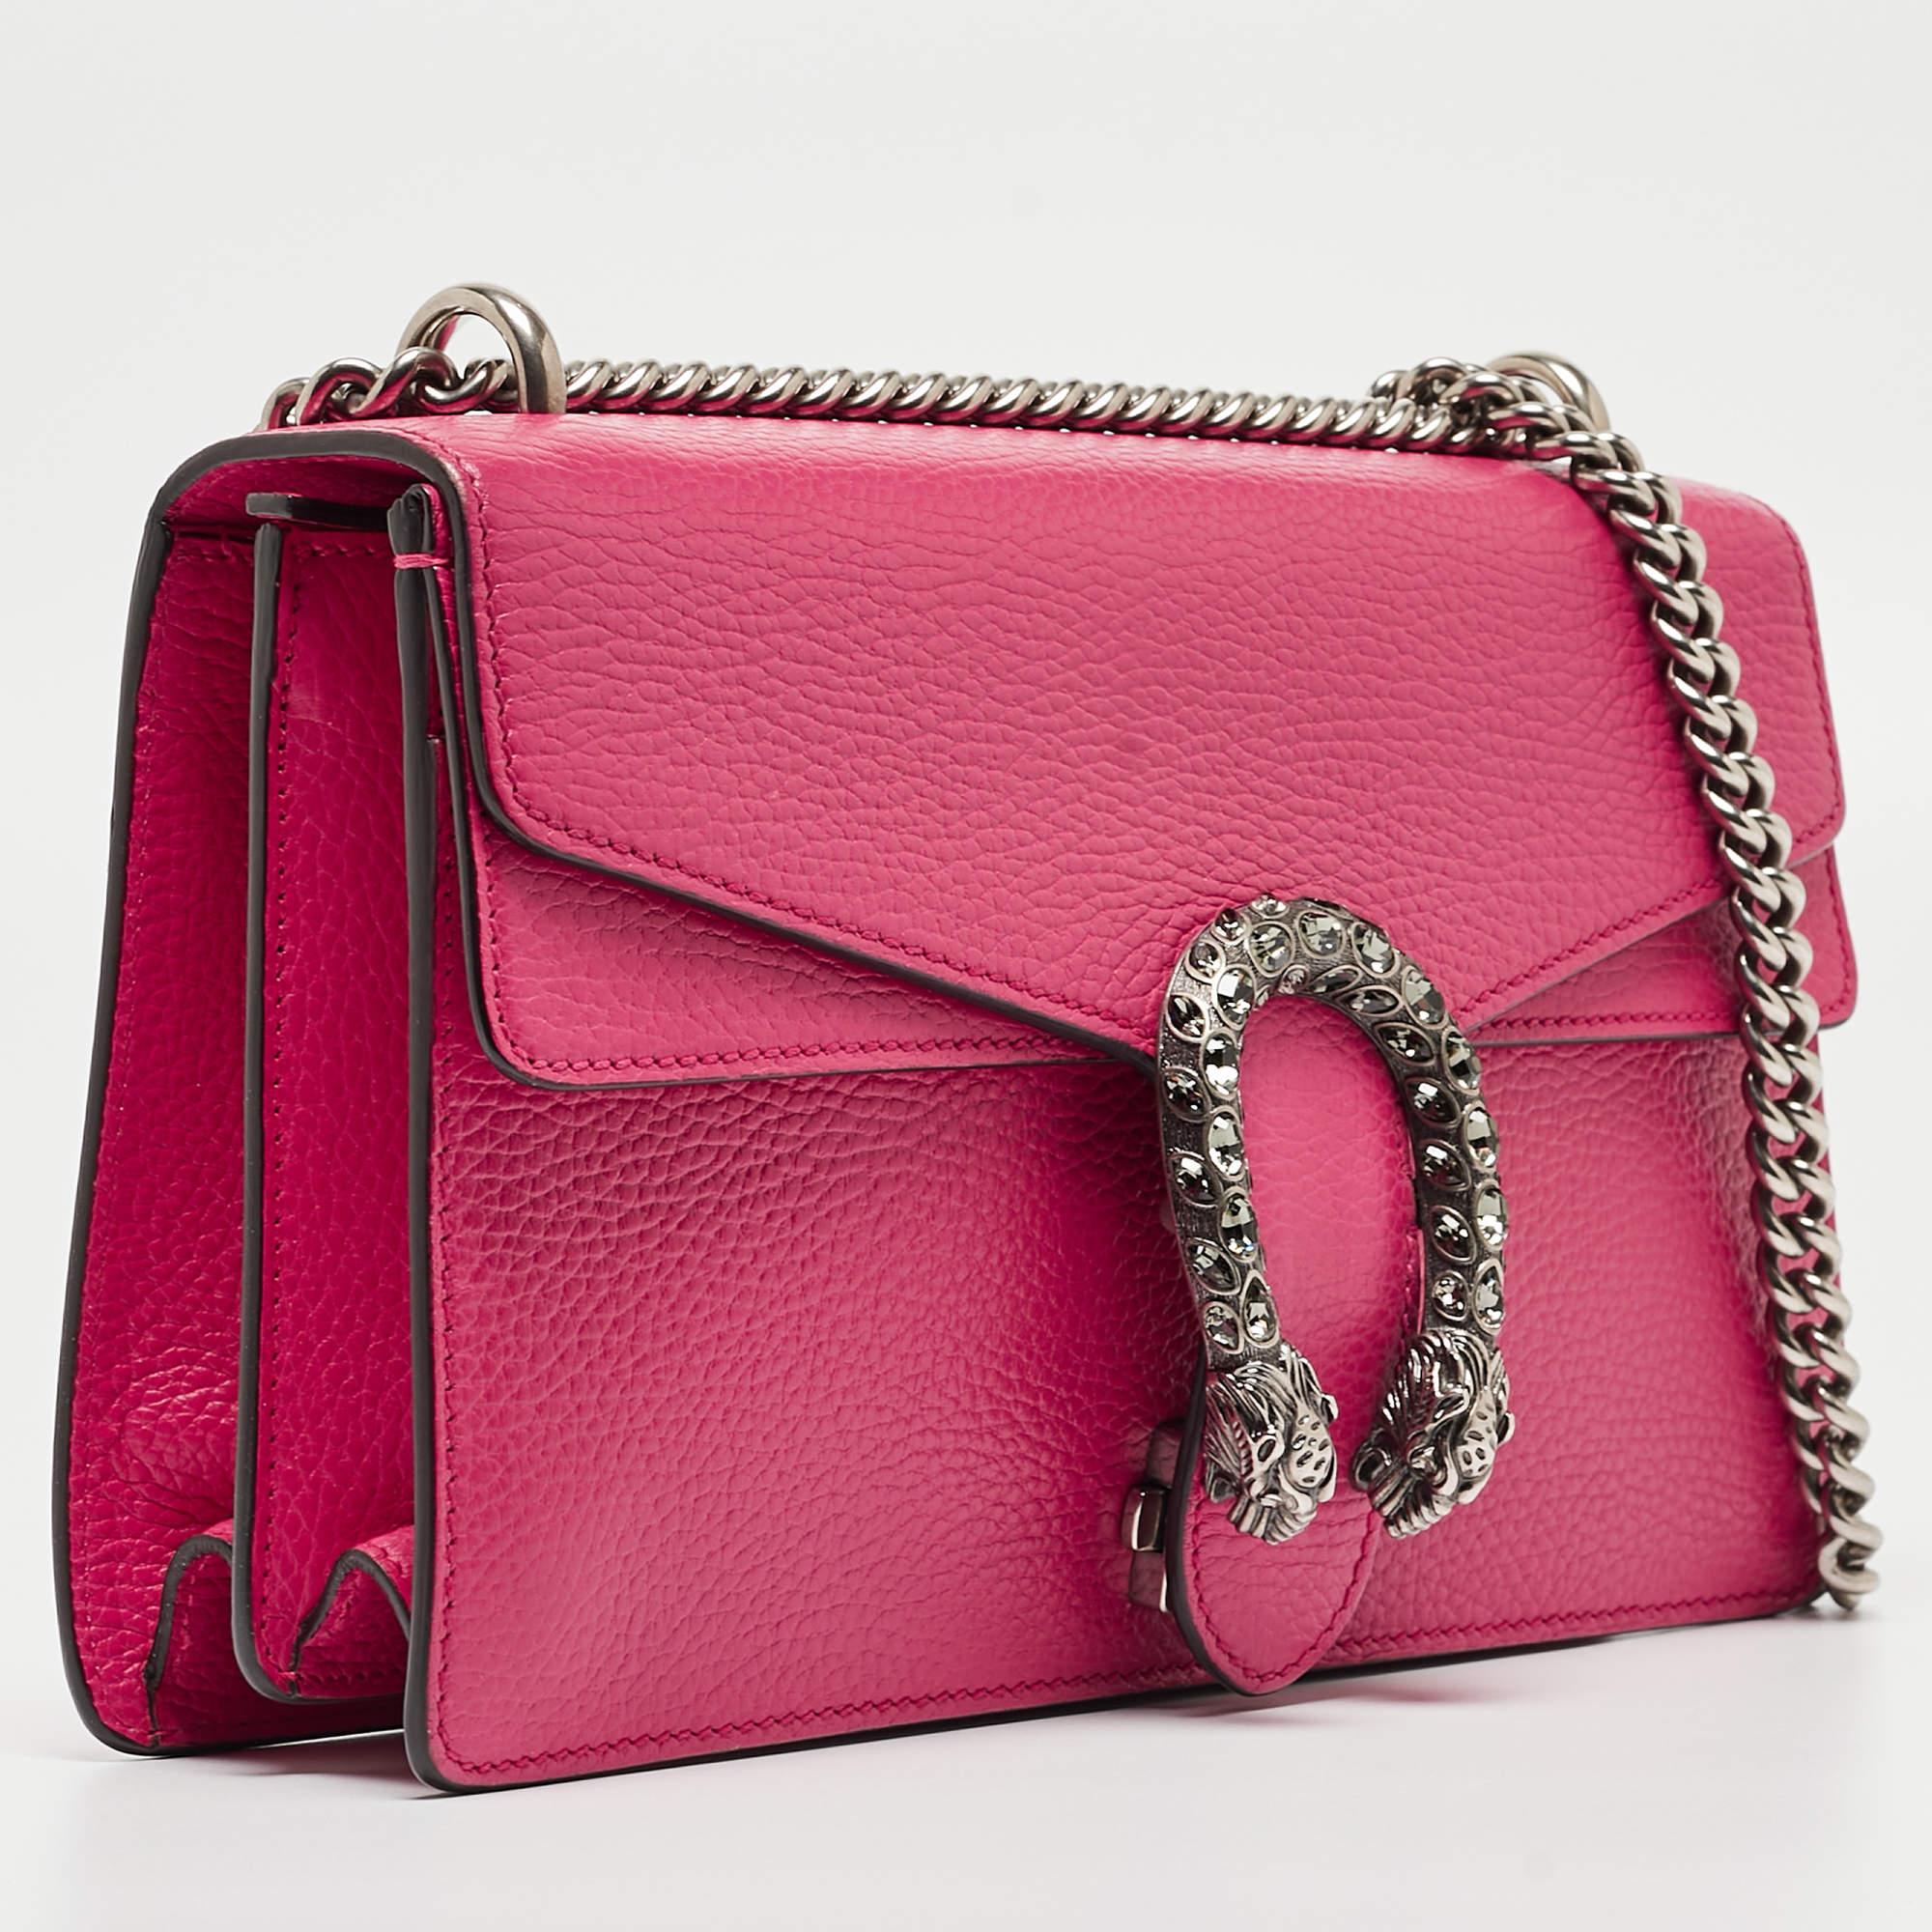 Gucci Pink Leather Small Dionysus Crystals Shoulder Bag 12